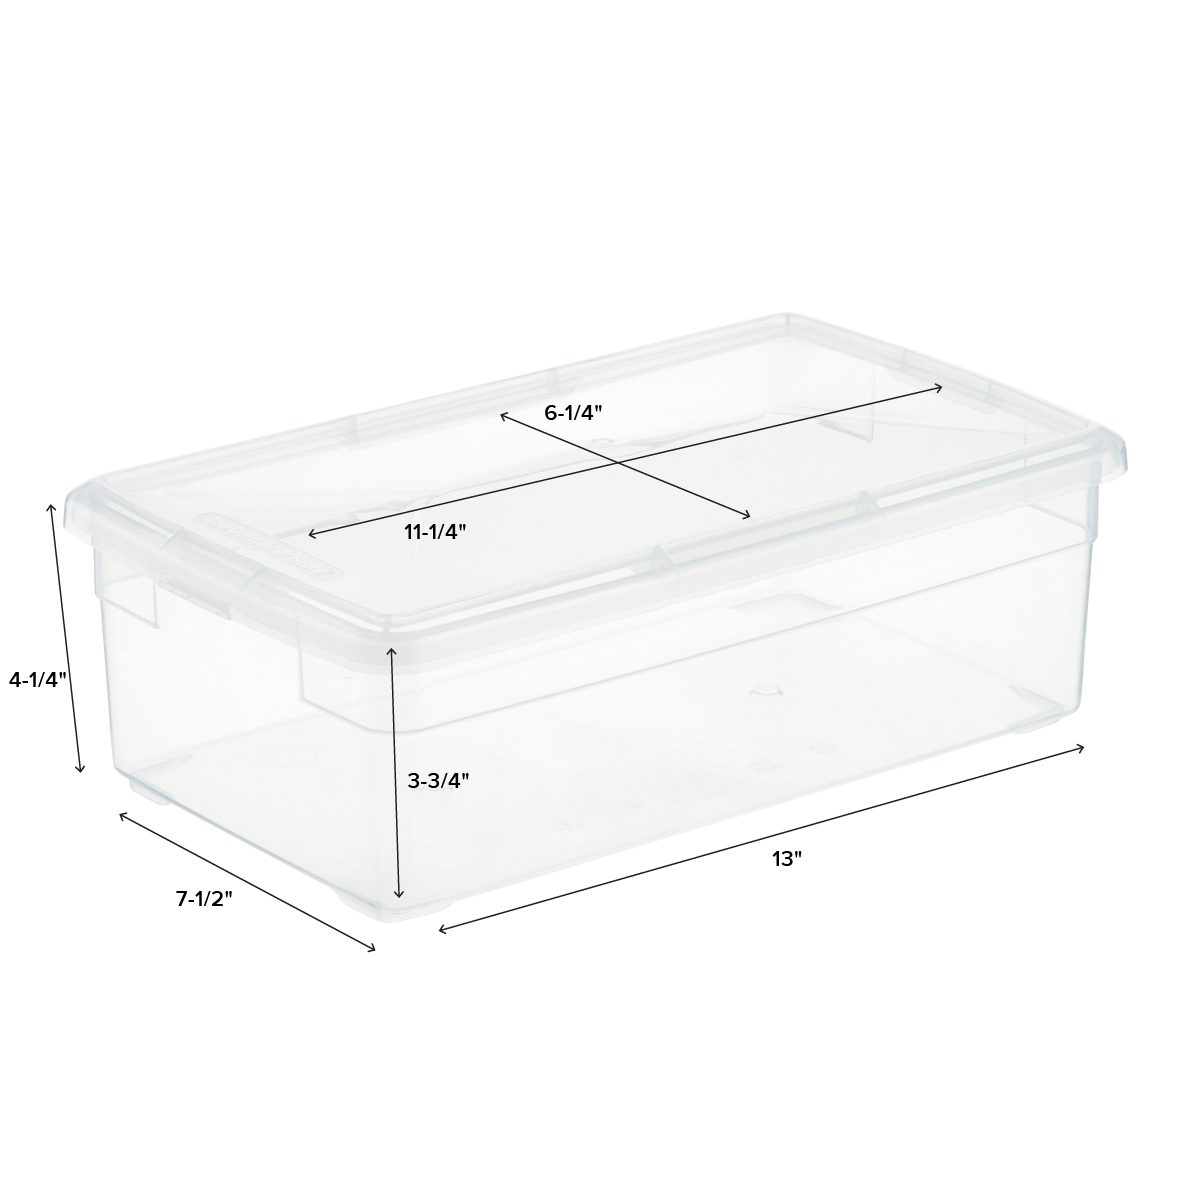 lighter shade ideal storage boxes/display 4 Crates 